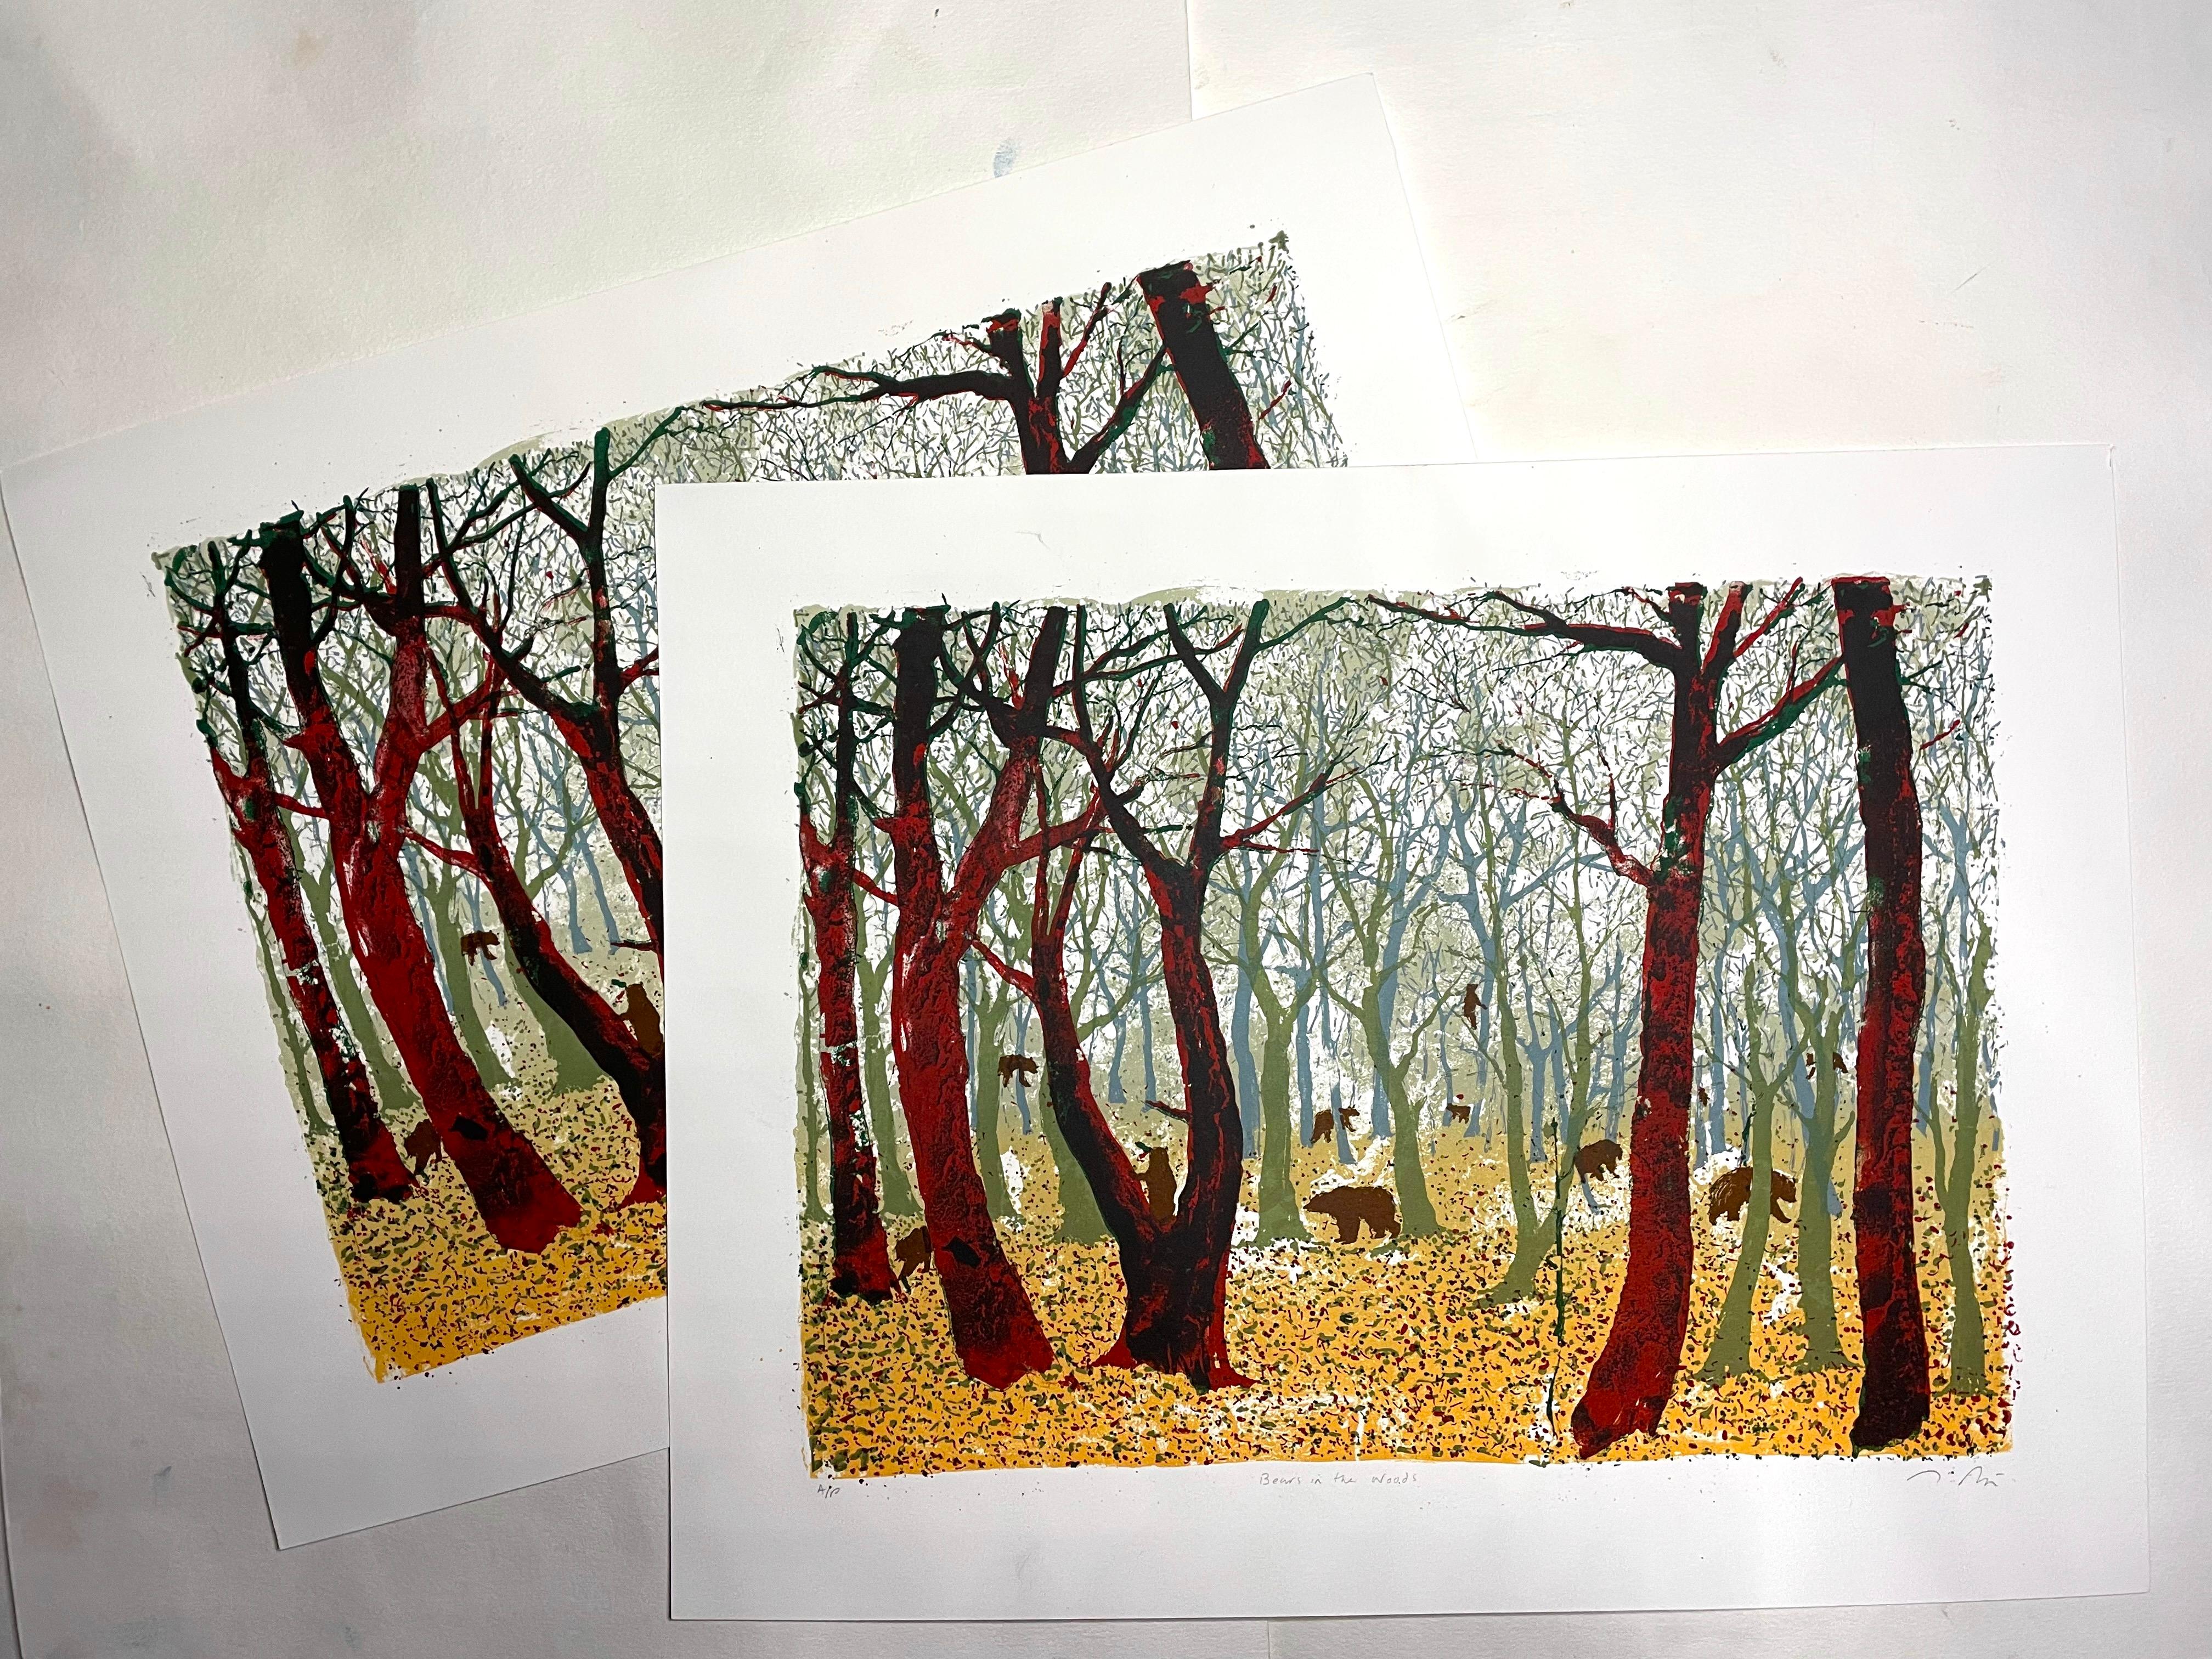 ‘Bears in the Woods’ is a playful silkscreen print depicting a number bears going about their business in autumnal woods. This 6 colour silkscreen is printed on Somerset Velvet, a heavyweight 300 gram handmade paper from St Cuthbert's Mill in